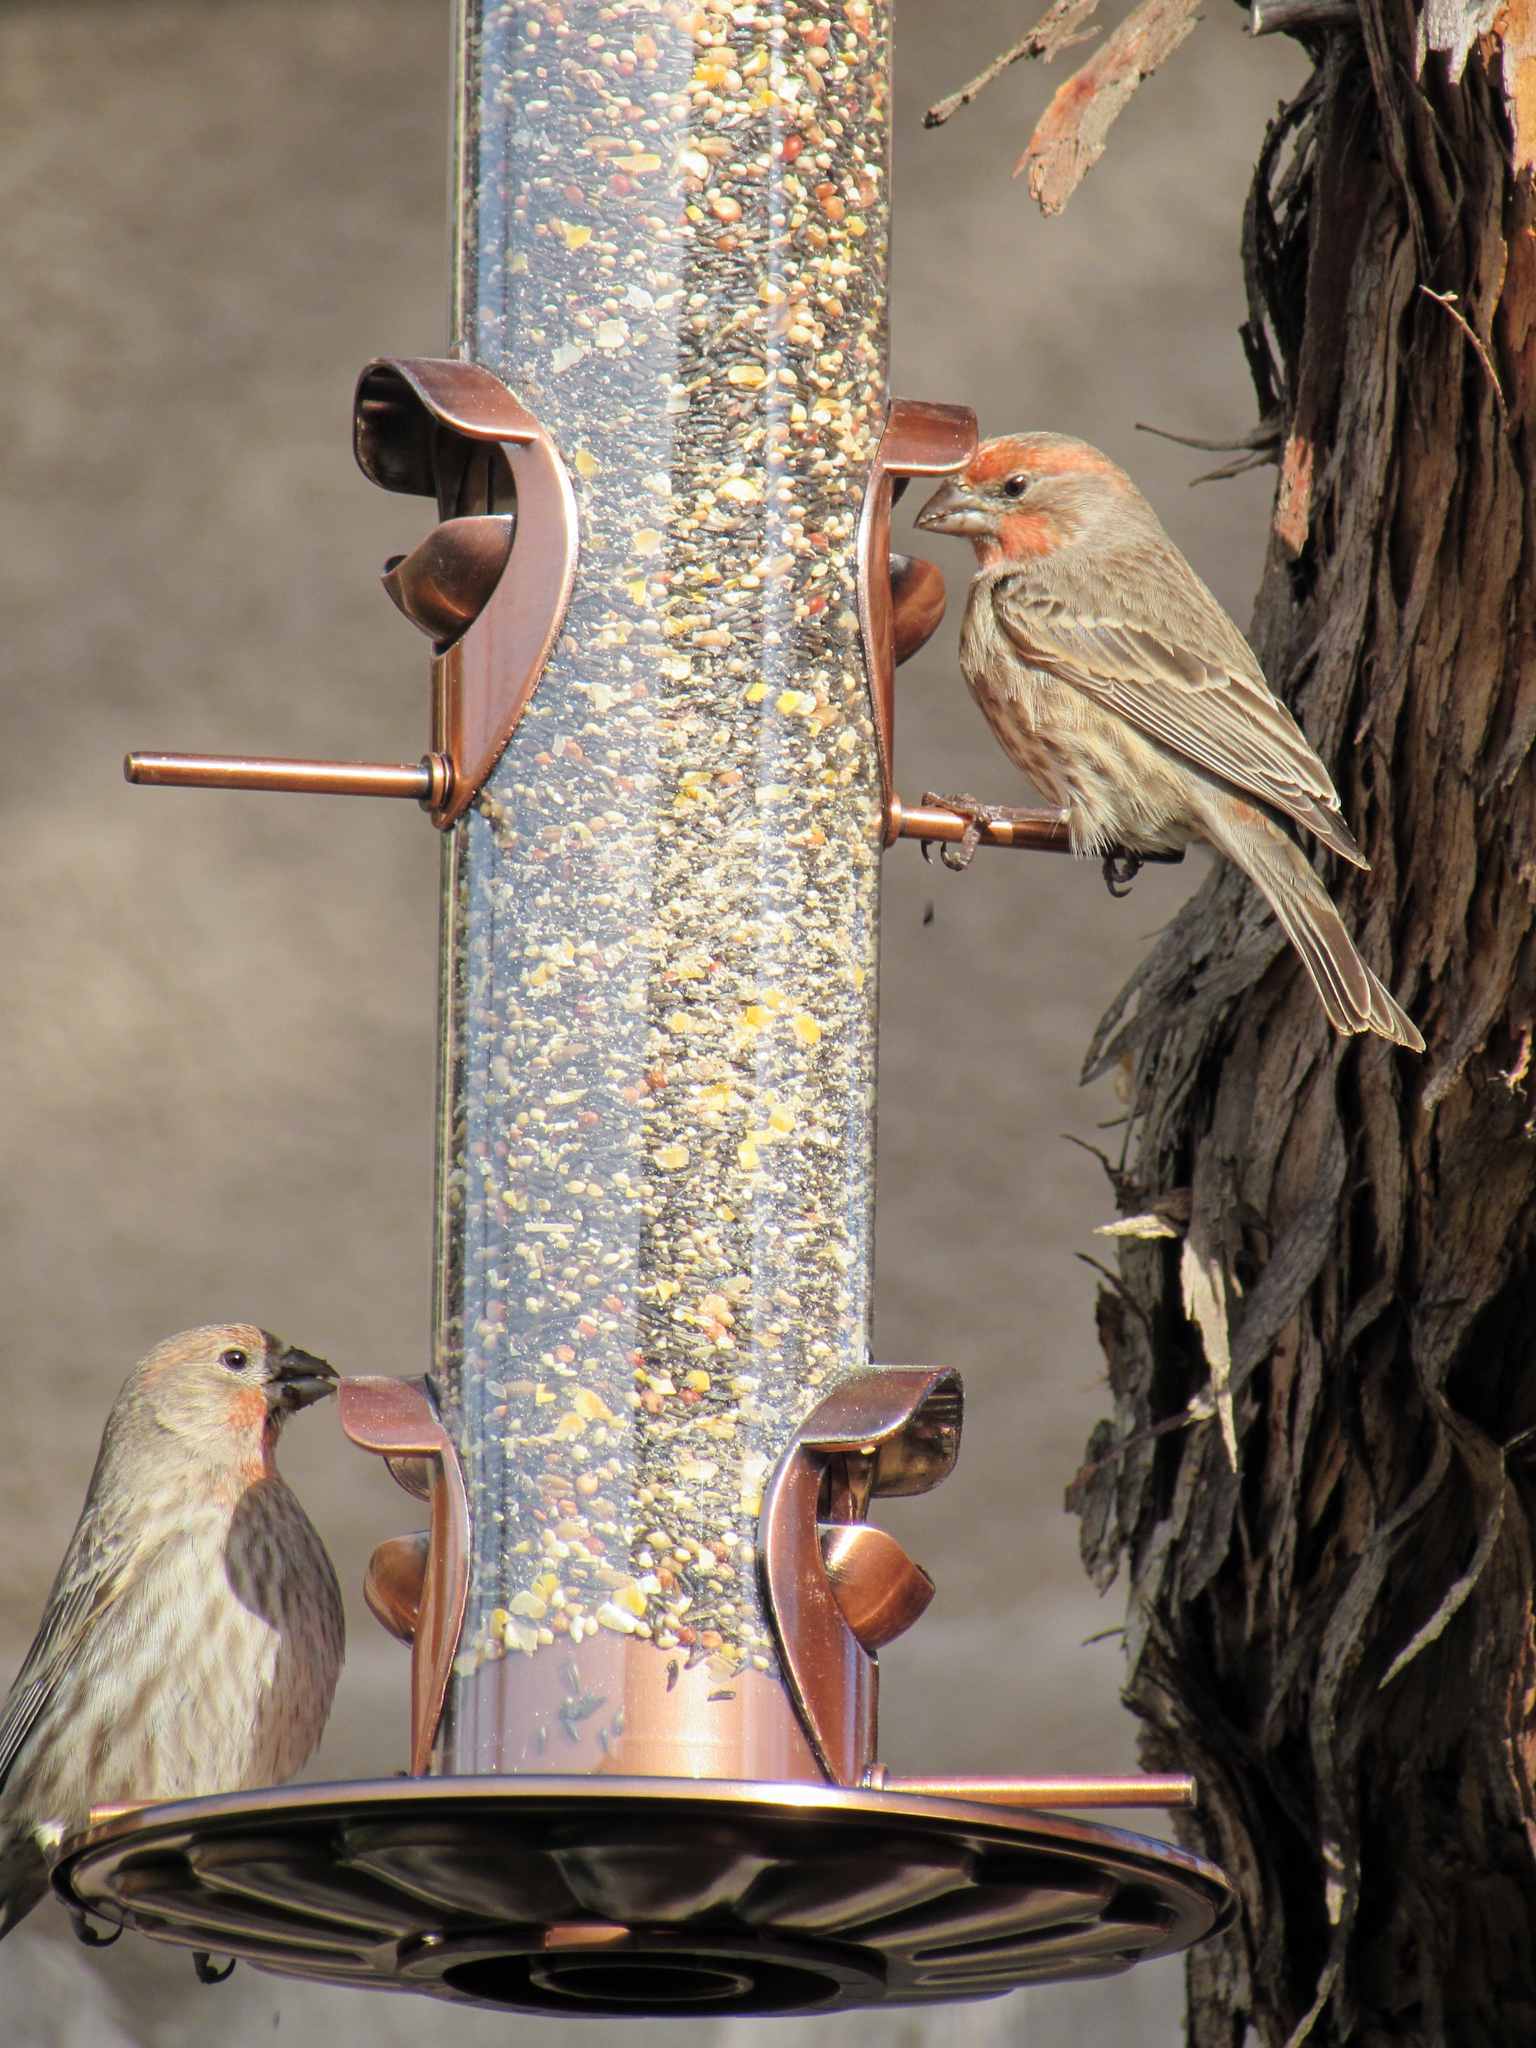 Two finches with red rouge on their chest and face are sitting on a copper plated glass bird feeder. There are two lower perches and two higher perches for birds to use. One is on the lower left while the other is on the upper right perch. The feeder is full of bird seed and you can see the side of a tree trunk from which it is hanging from. 